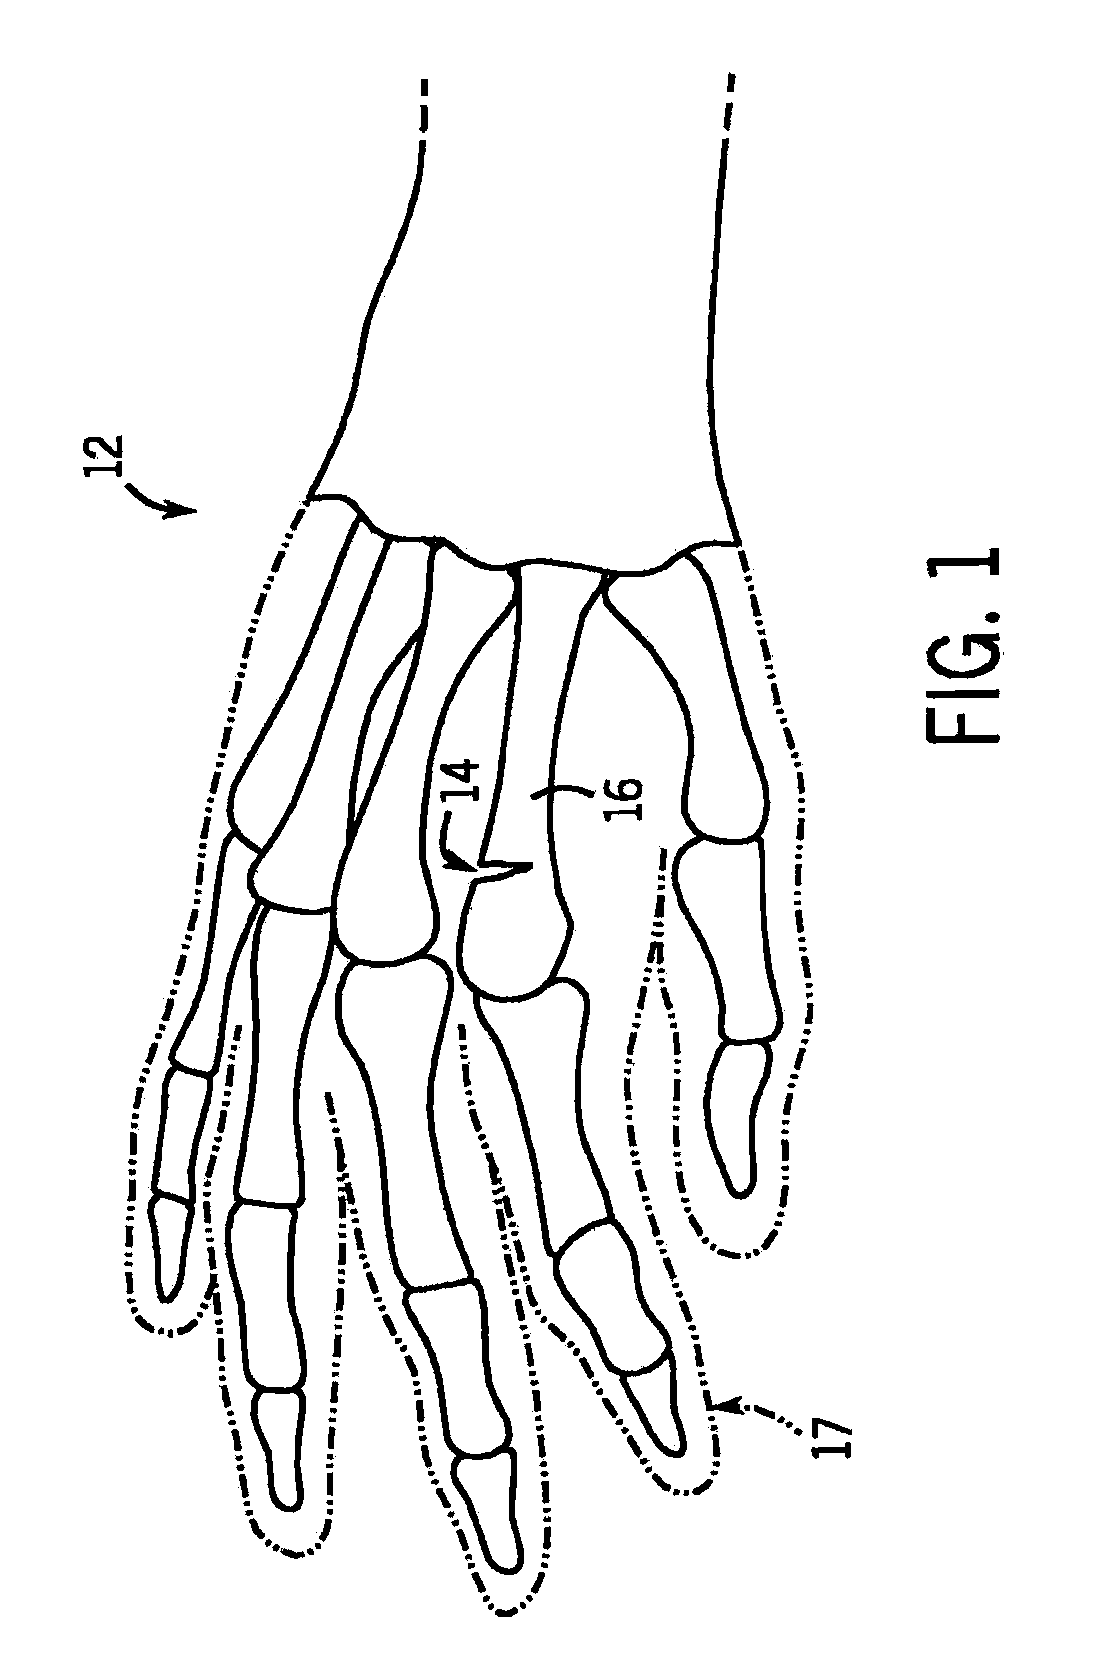 Intramedullary Fixation Device for Small Bone Fractures